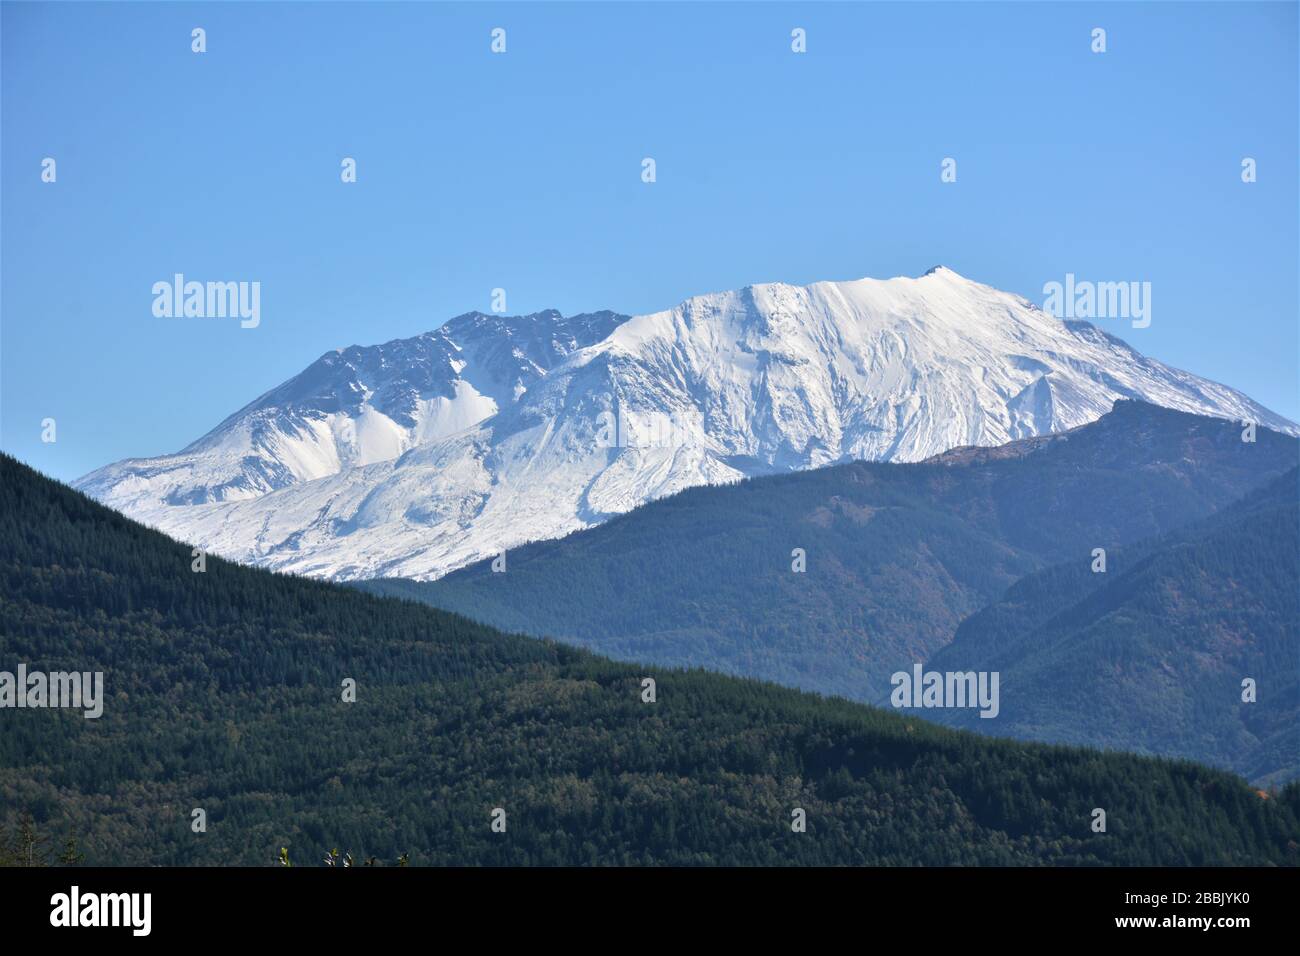 The snowy slopes of Mt St Helens in October, seen from Route 504, Cowlitz County, Washington State, USA. Stock Photo